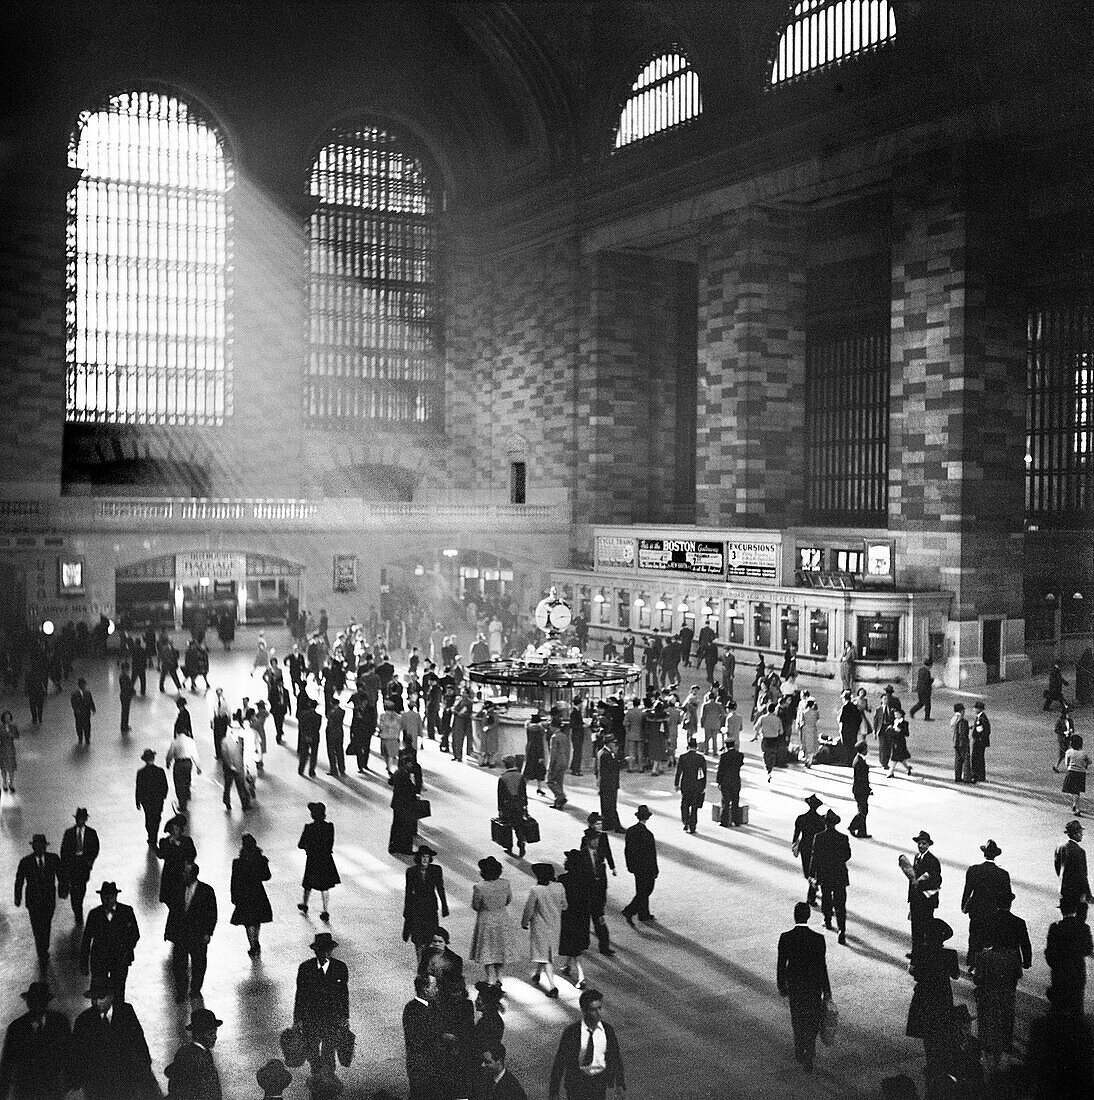 Main Concourse with sunlight streaming through windows, Grand Central Terminal, New York City, New York, USA, John Collier, Jr., U.S. Office of War Information/U.S. Farm Security Administration, October 1941